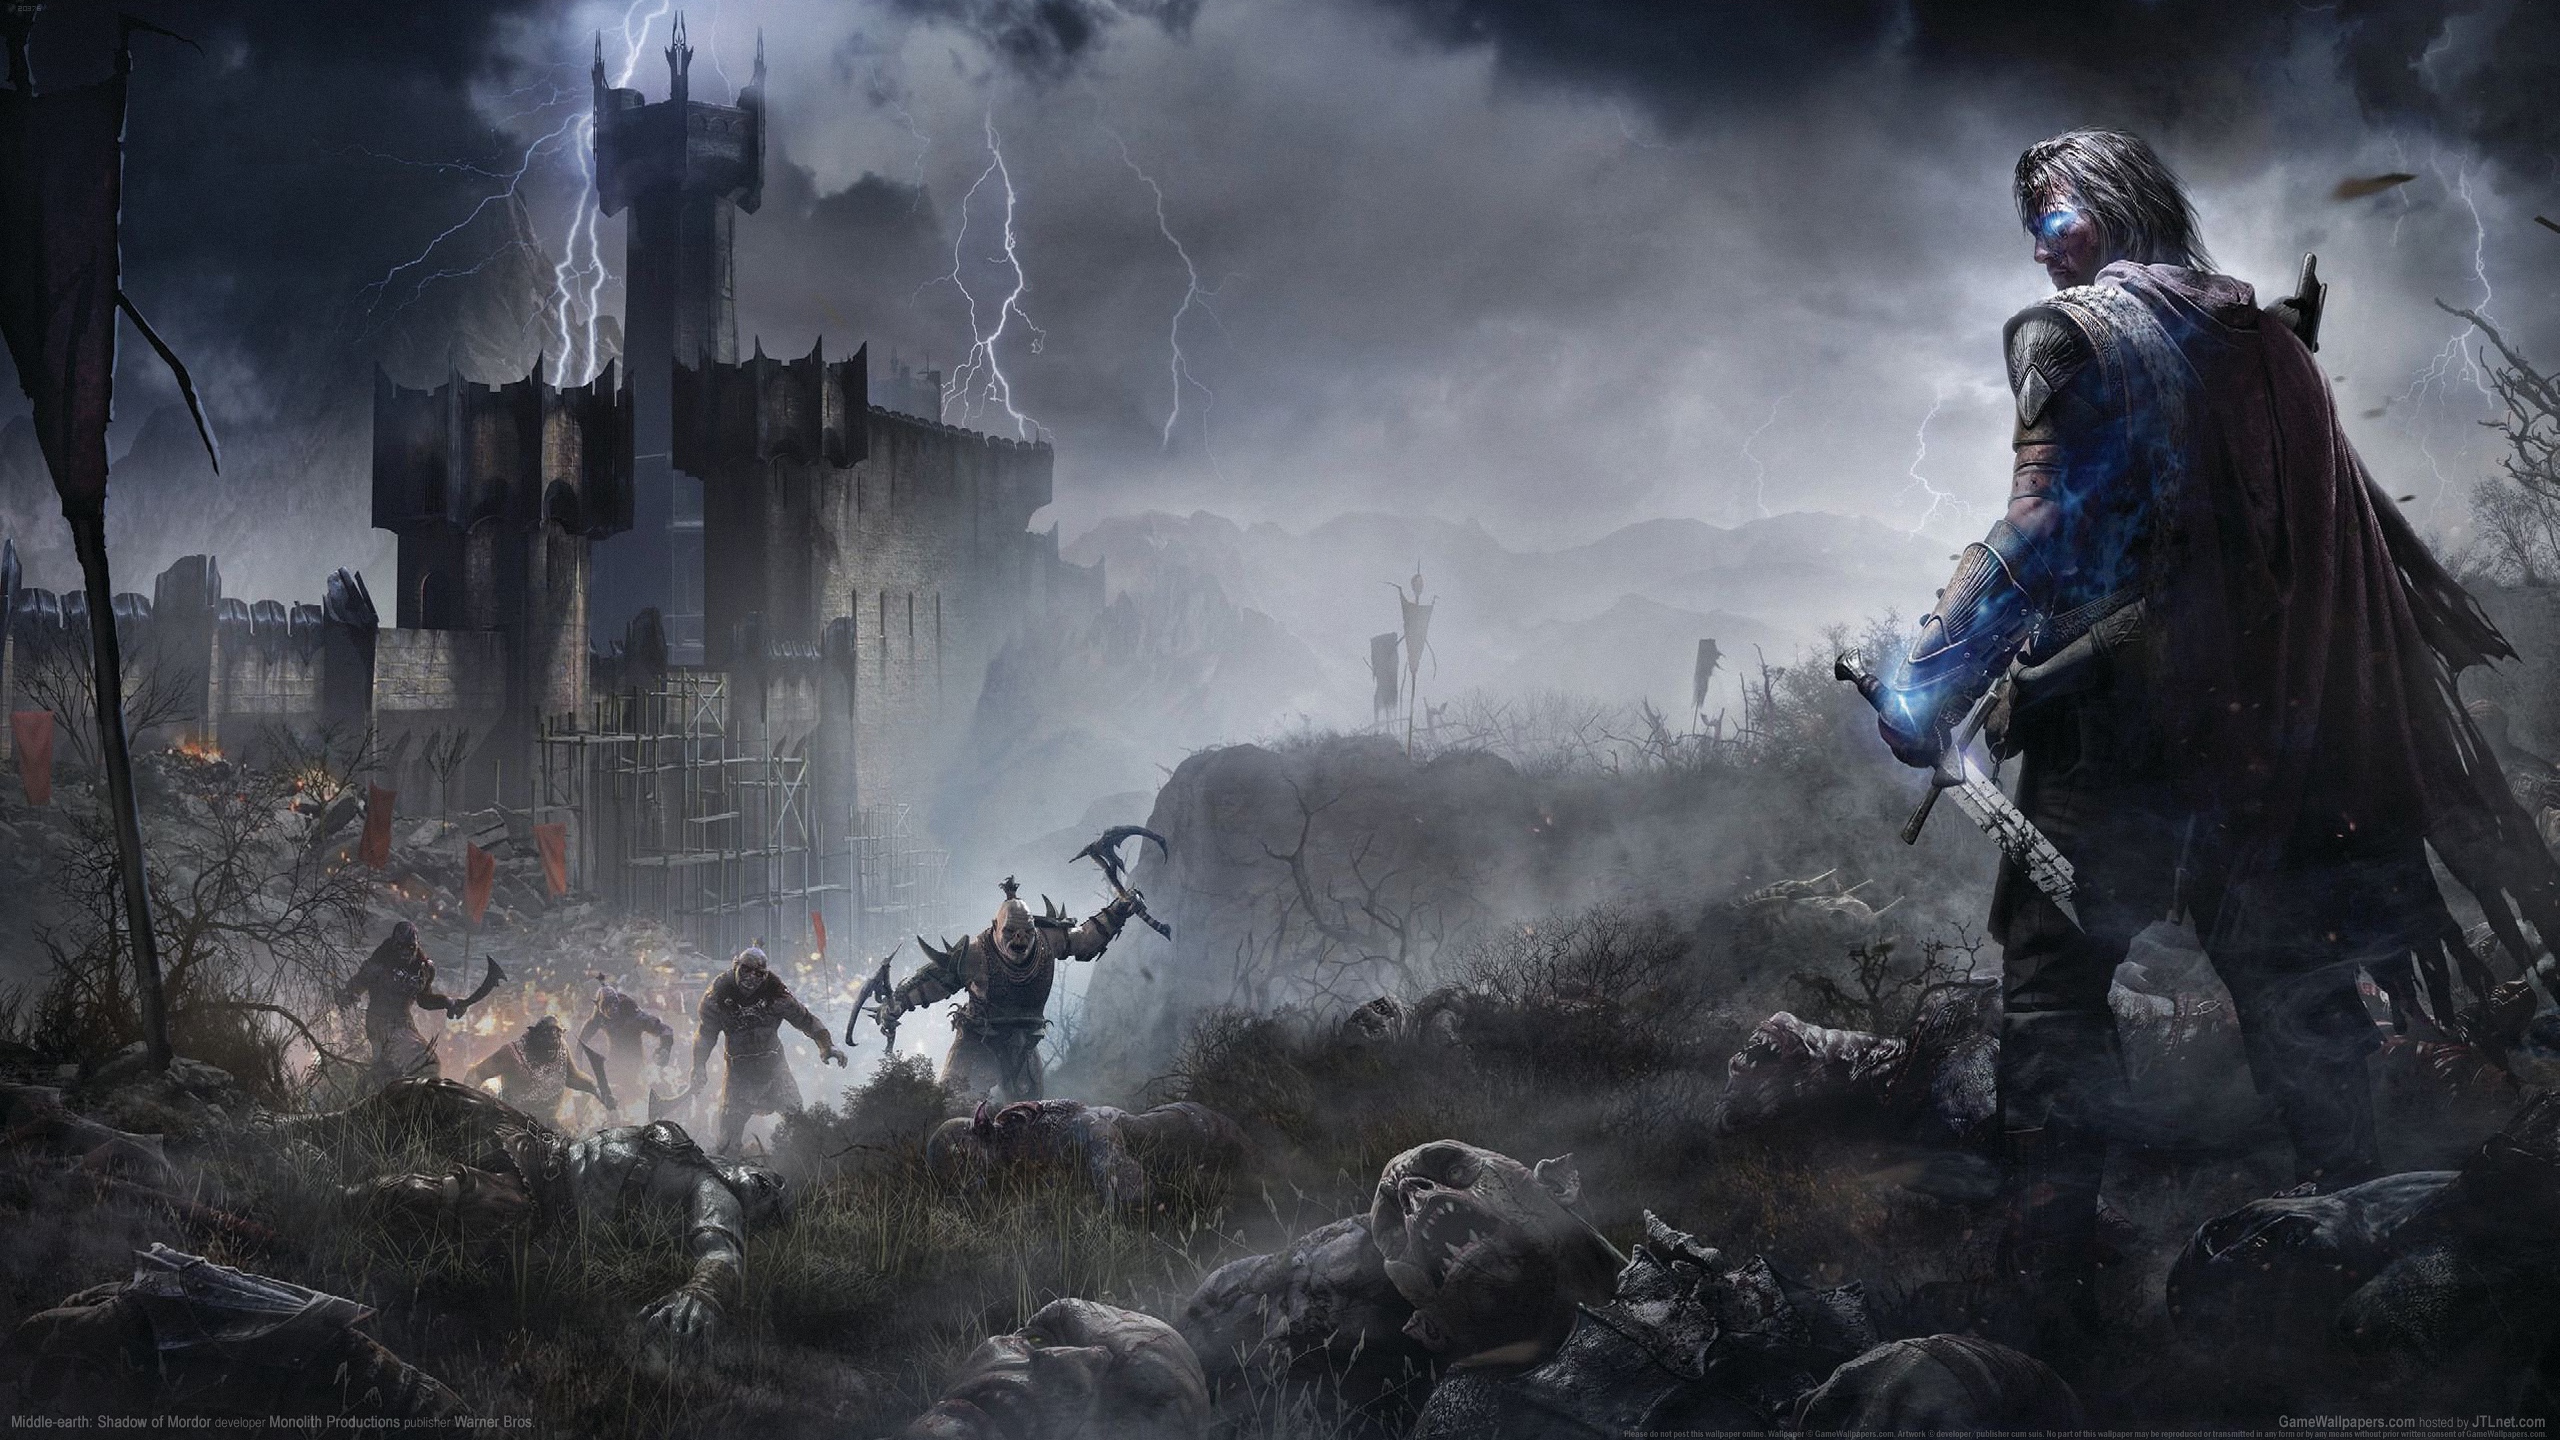 shadow of mordor wallpaper,action adventure game,cg artwork,illustration,darkness,strategy video game